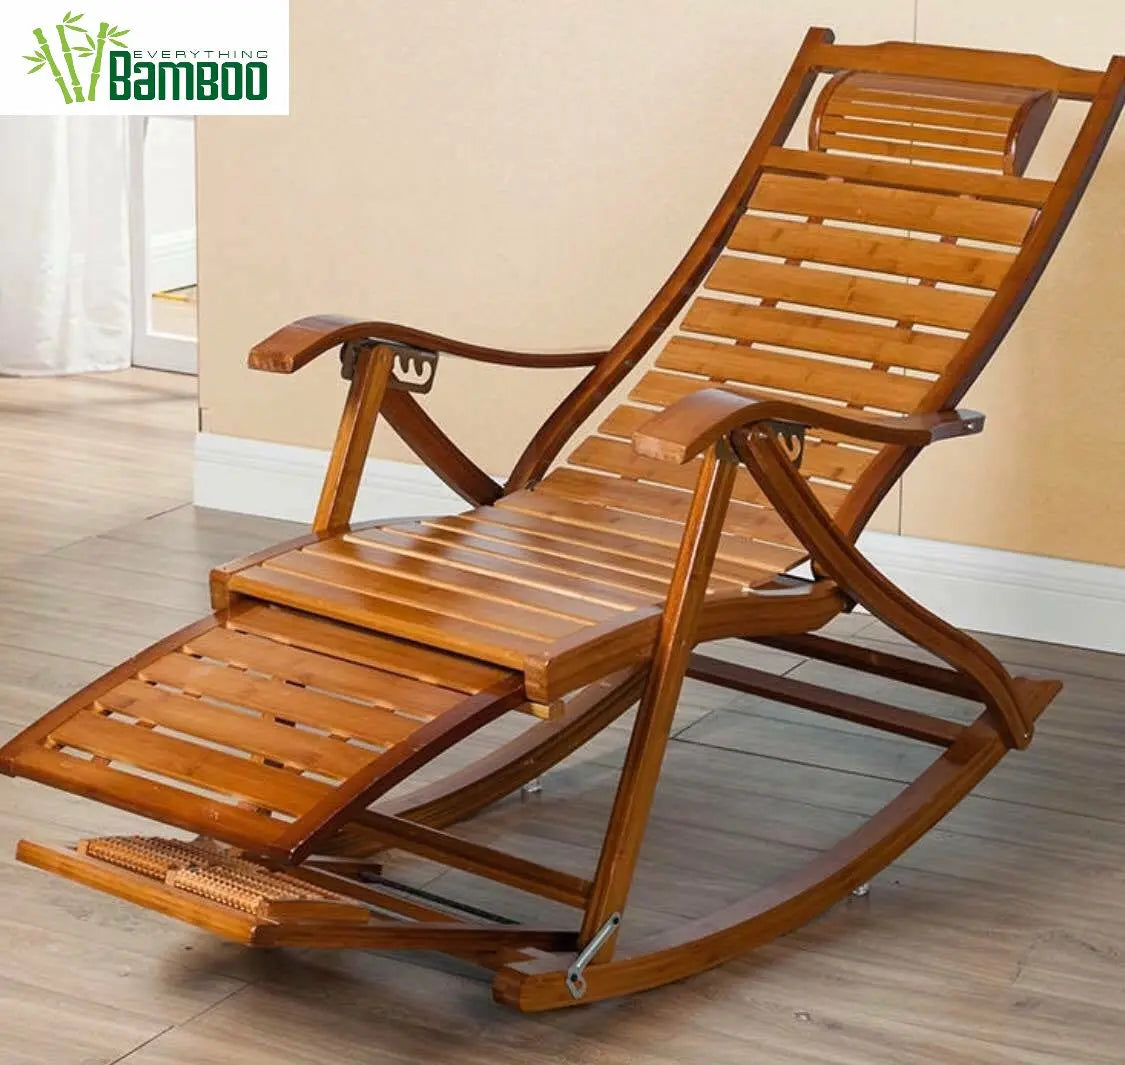 Bamboo Adjustable Rocking Recliner Chair Relax W Foot Massager And Cushion everythingbamboo